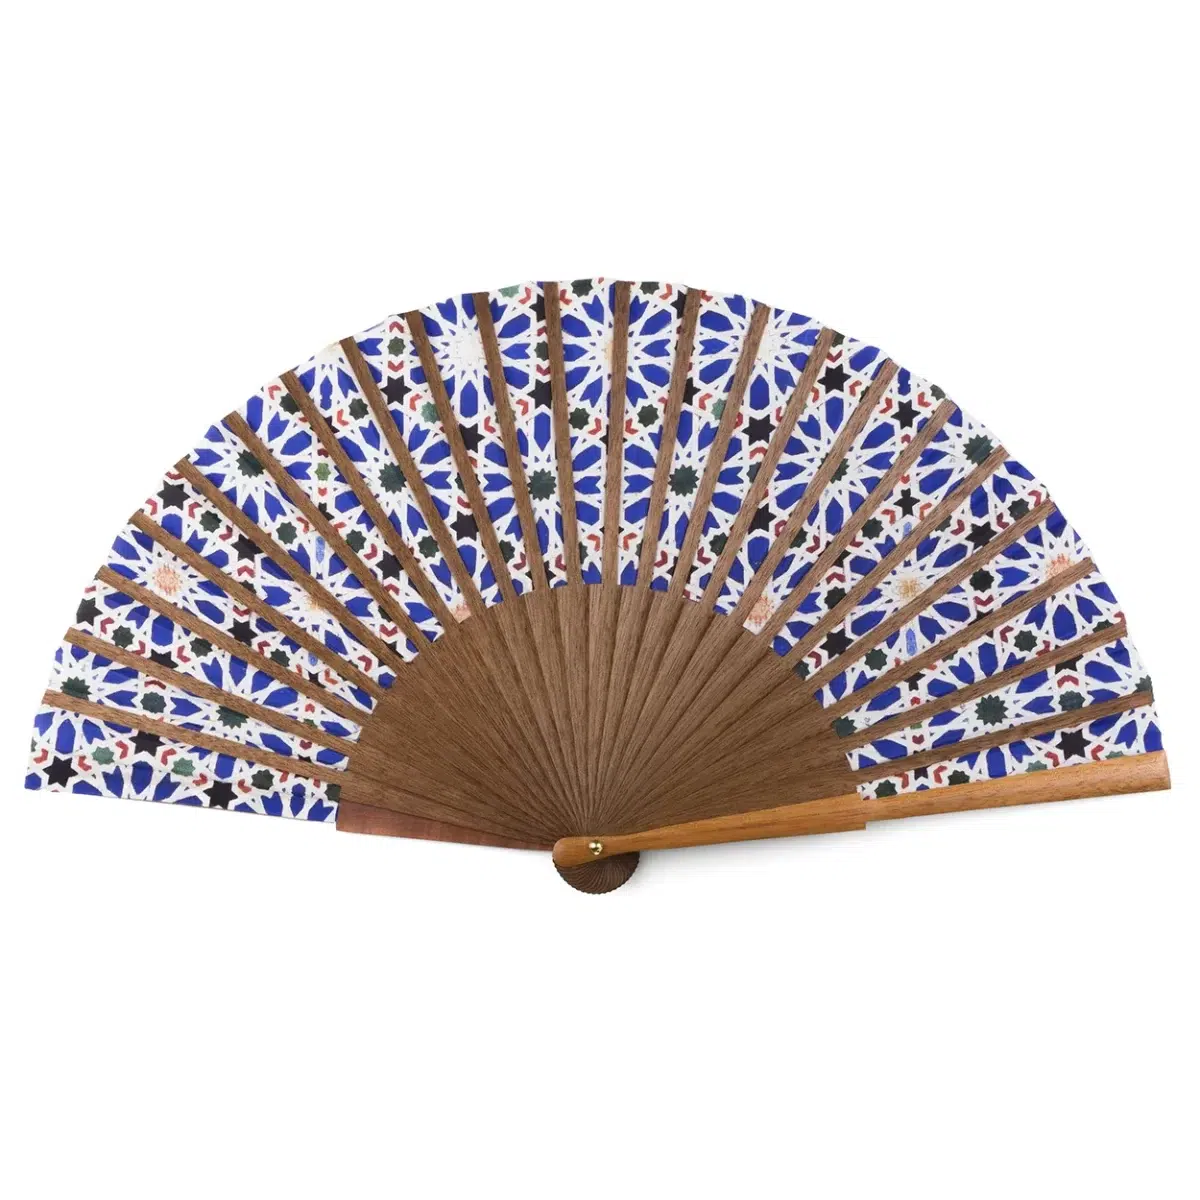 Blue and White Silk Fan with Natural Wood Ribs, Inspired by the Mosaics of the Alcazar of Seville.